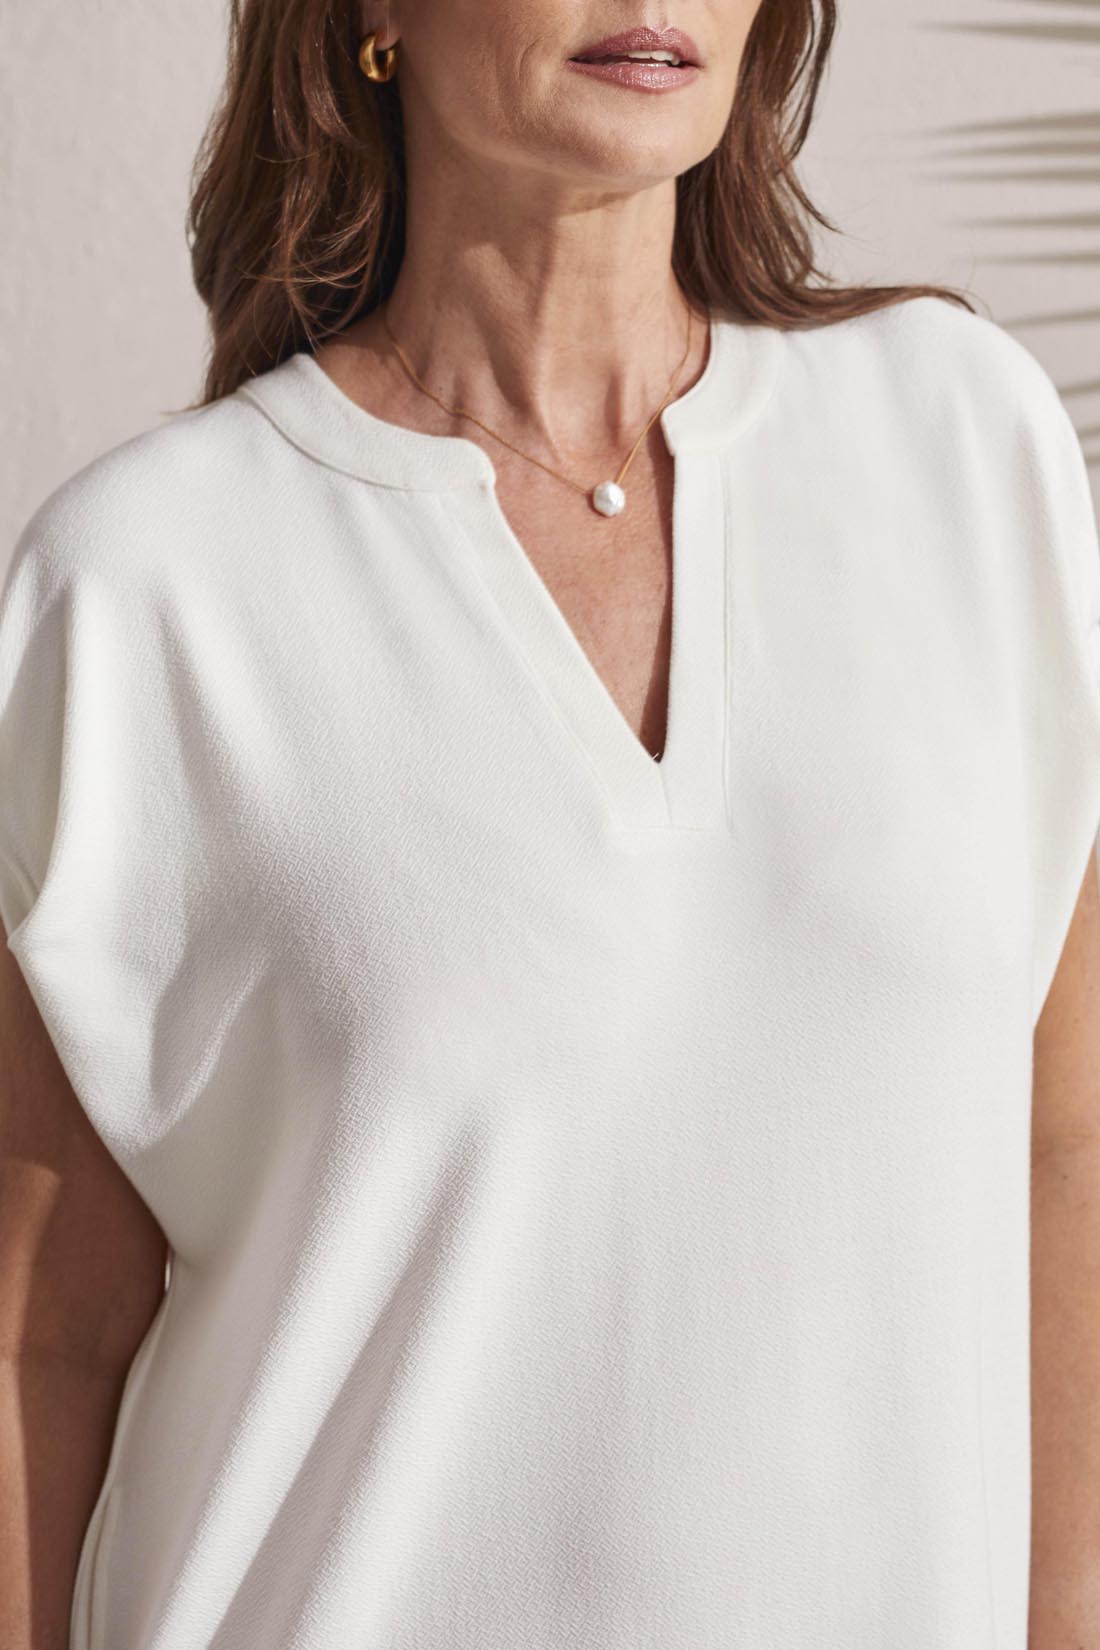 Woman in a versatile white Tribal Shift Knit Dress with a V-neckline and short sleeves, adorned with a pearl necklace.